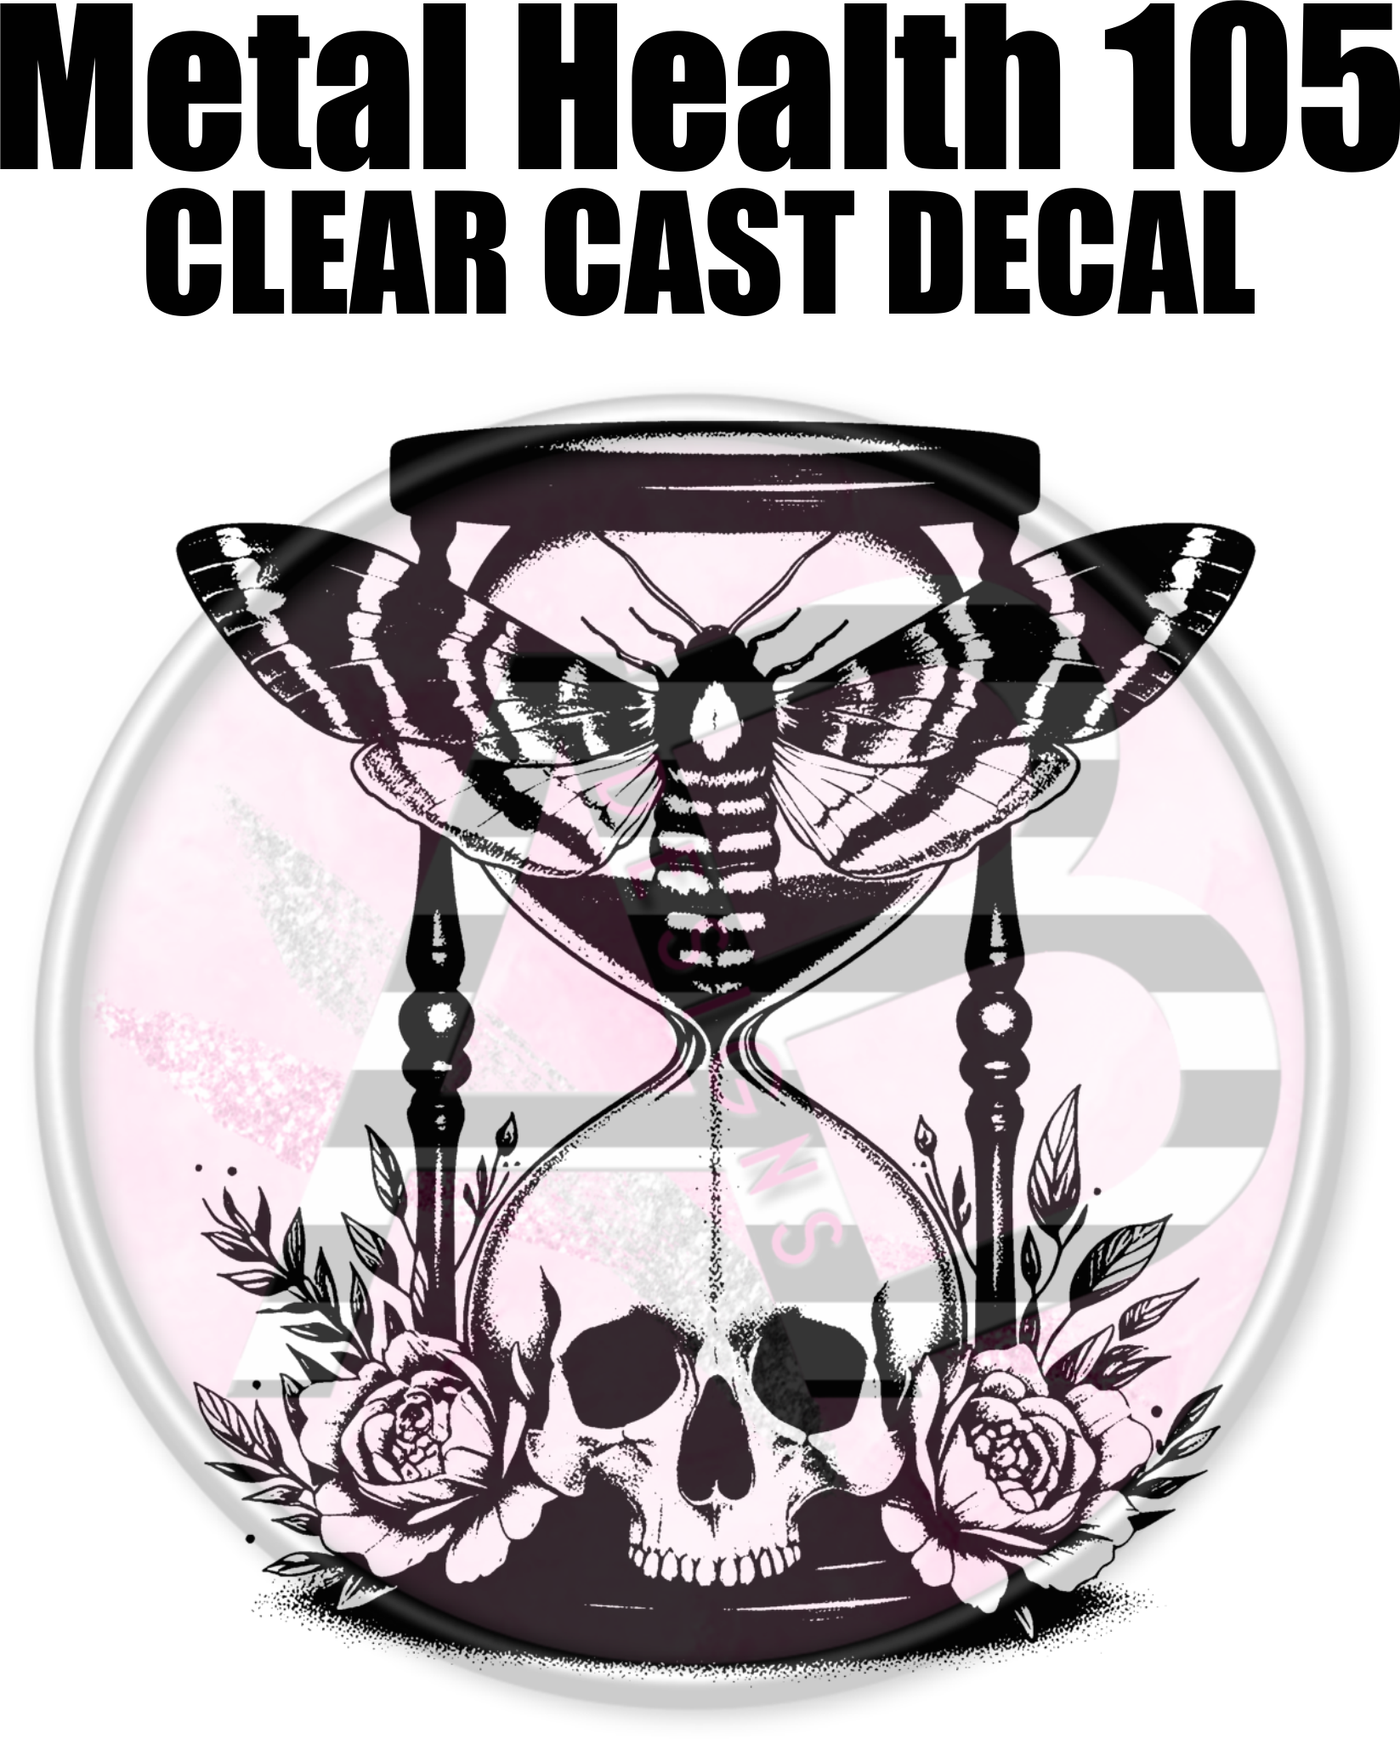 Mental Health 105 - Clear Cast Decal-574